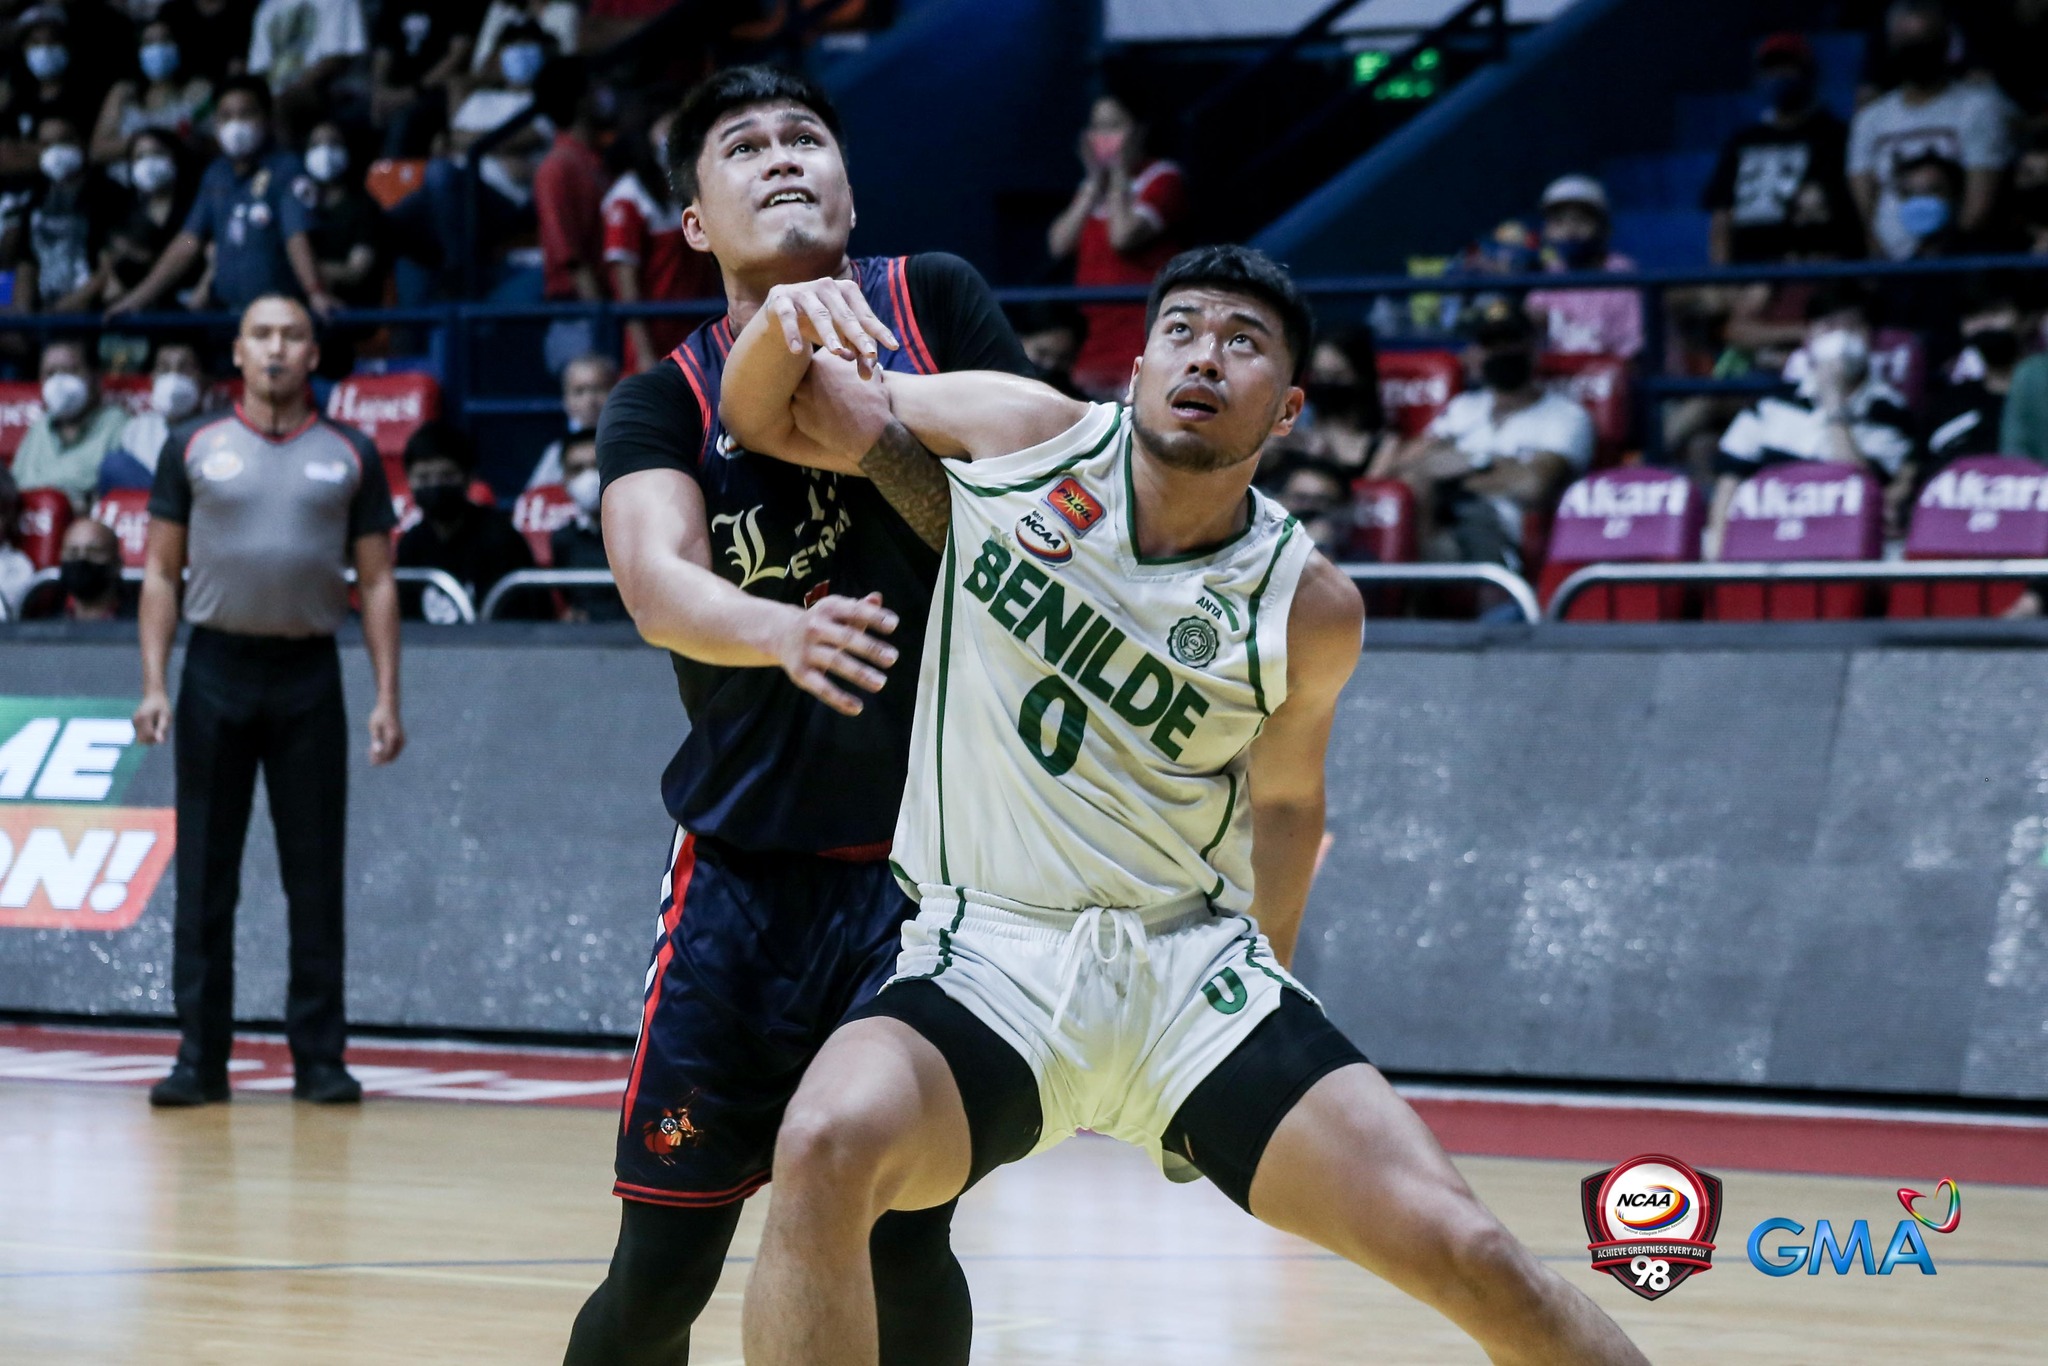 NCAA: San Beda coach believes St. Benilde will win title, Lyceum mentor sees exciting final